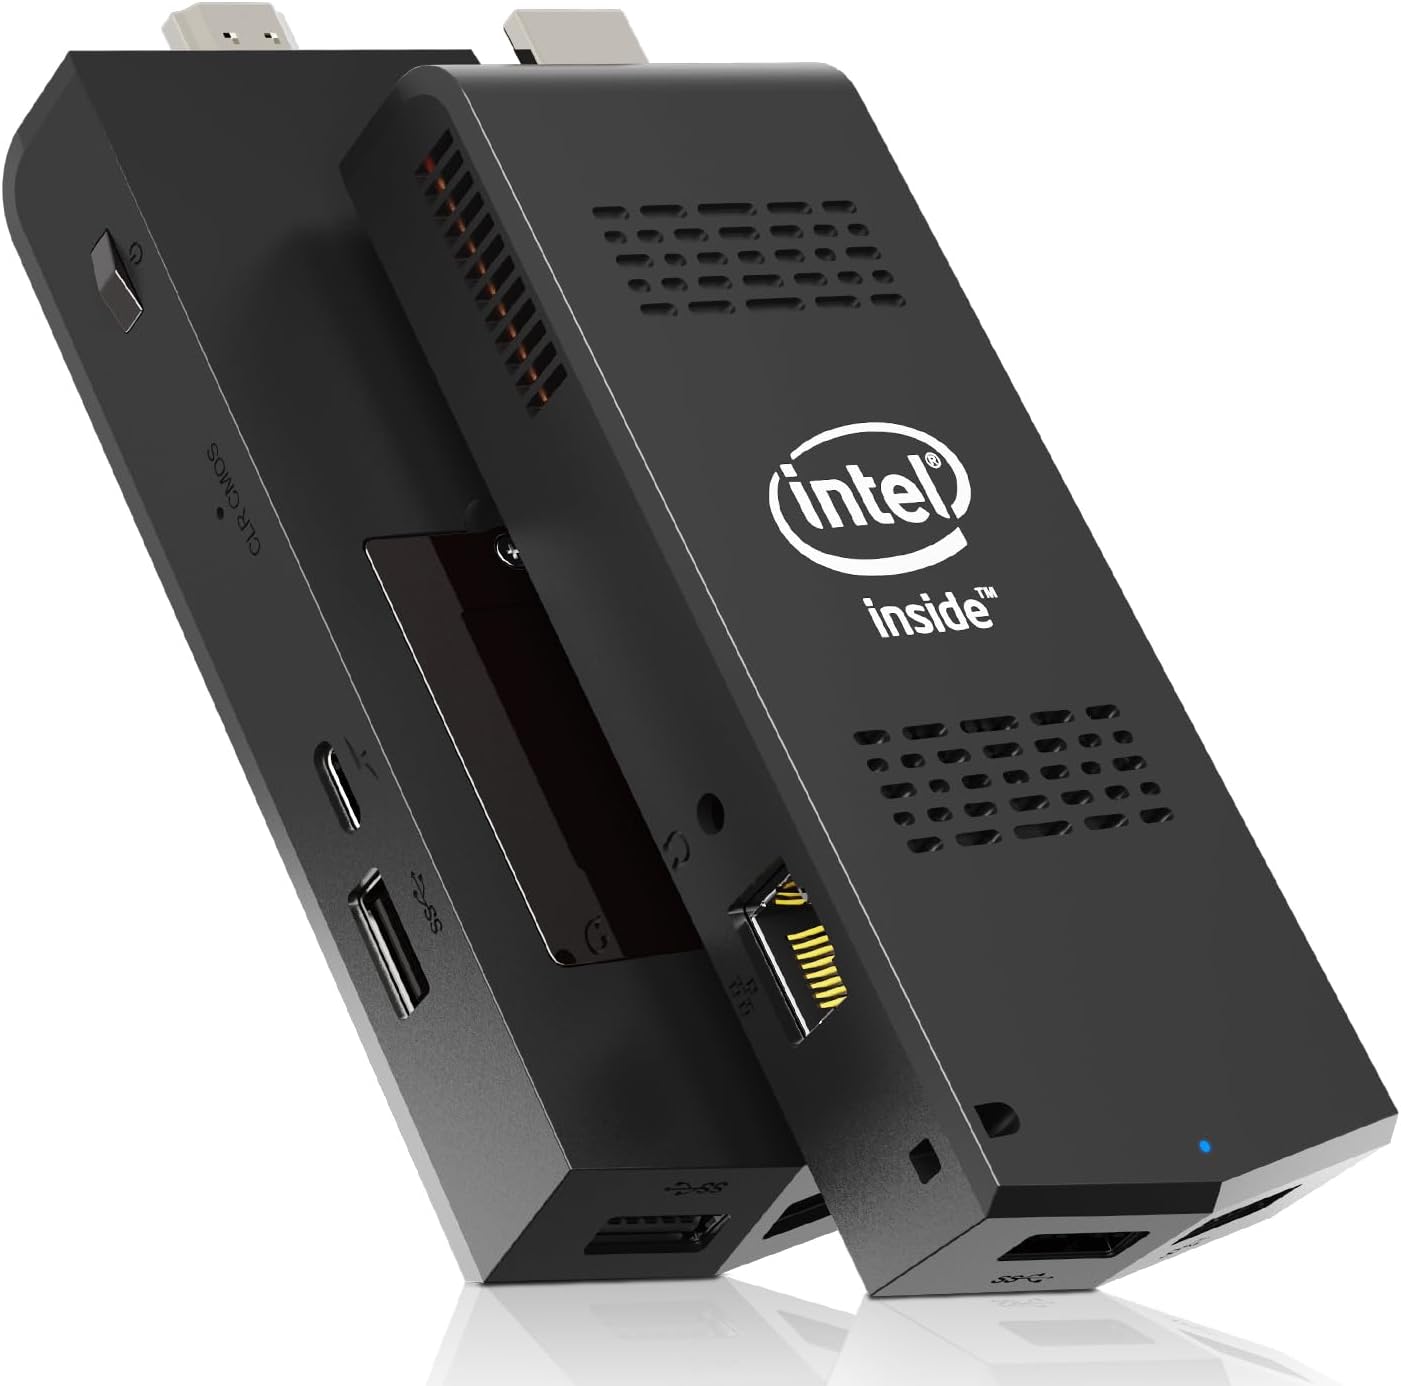 Mini PC Stick 512GB SSD 8GB RAM with Celeron J4125  Windows 11 Pro, Computer Stick Support HDMI 4K 60Hz, Dual Band WiFi 2.4G/5G, BT 4.2,Gigabit Ethernet, Support Auto-On After Power Failure